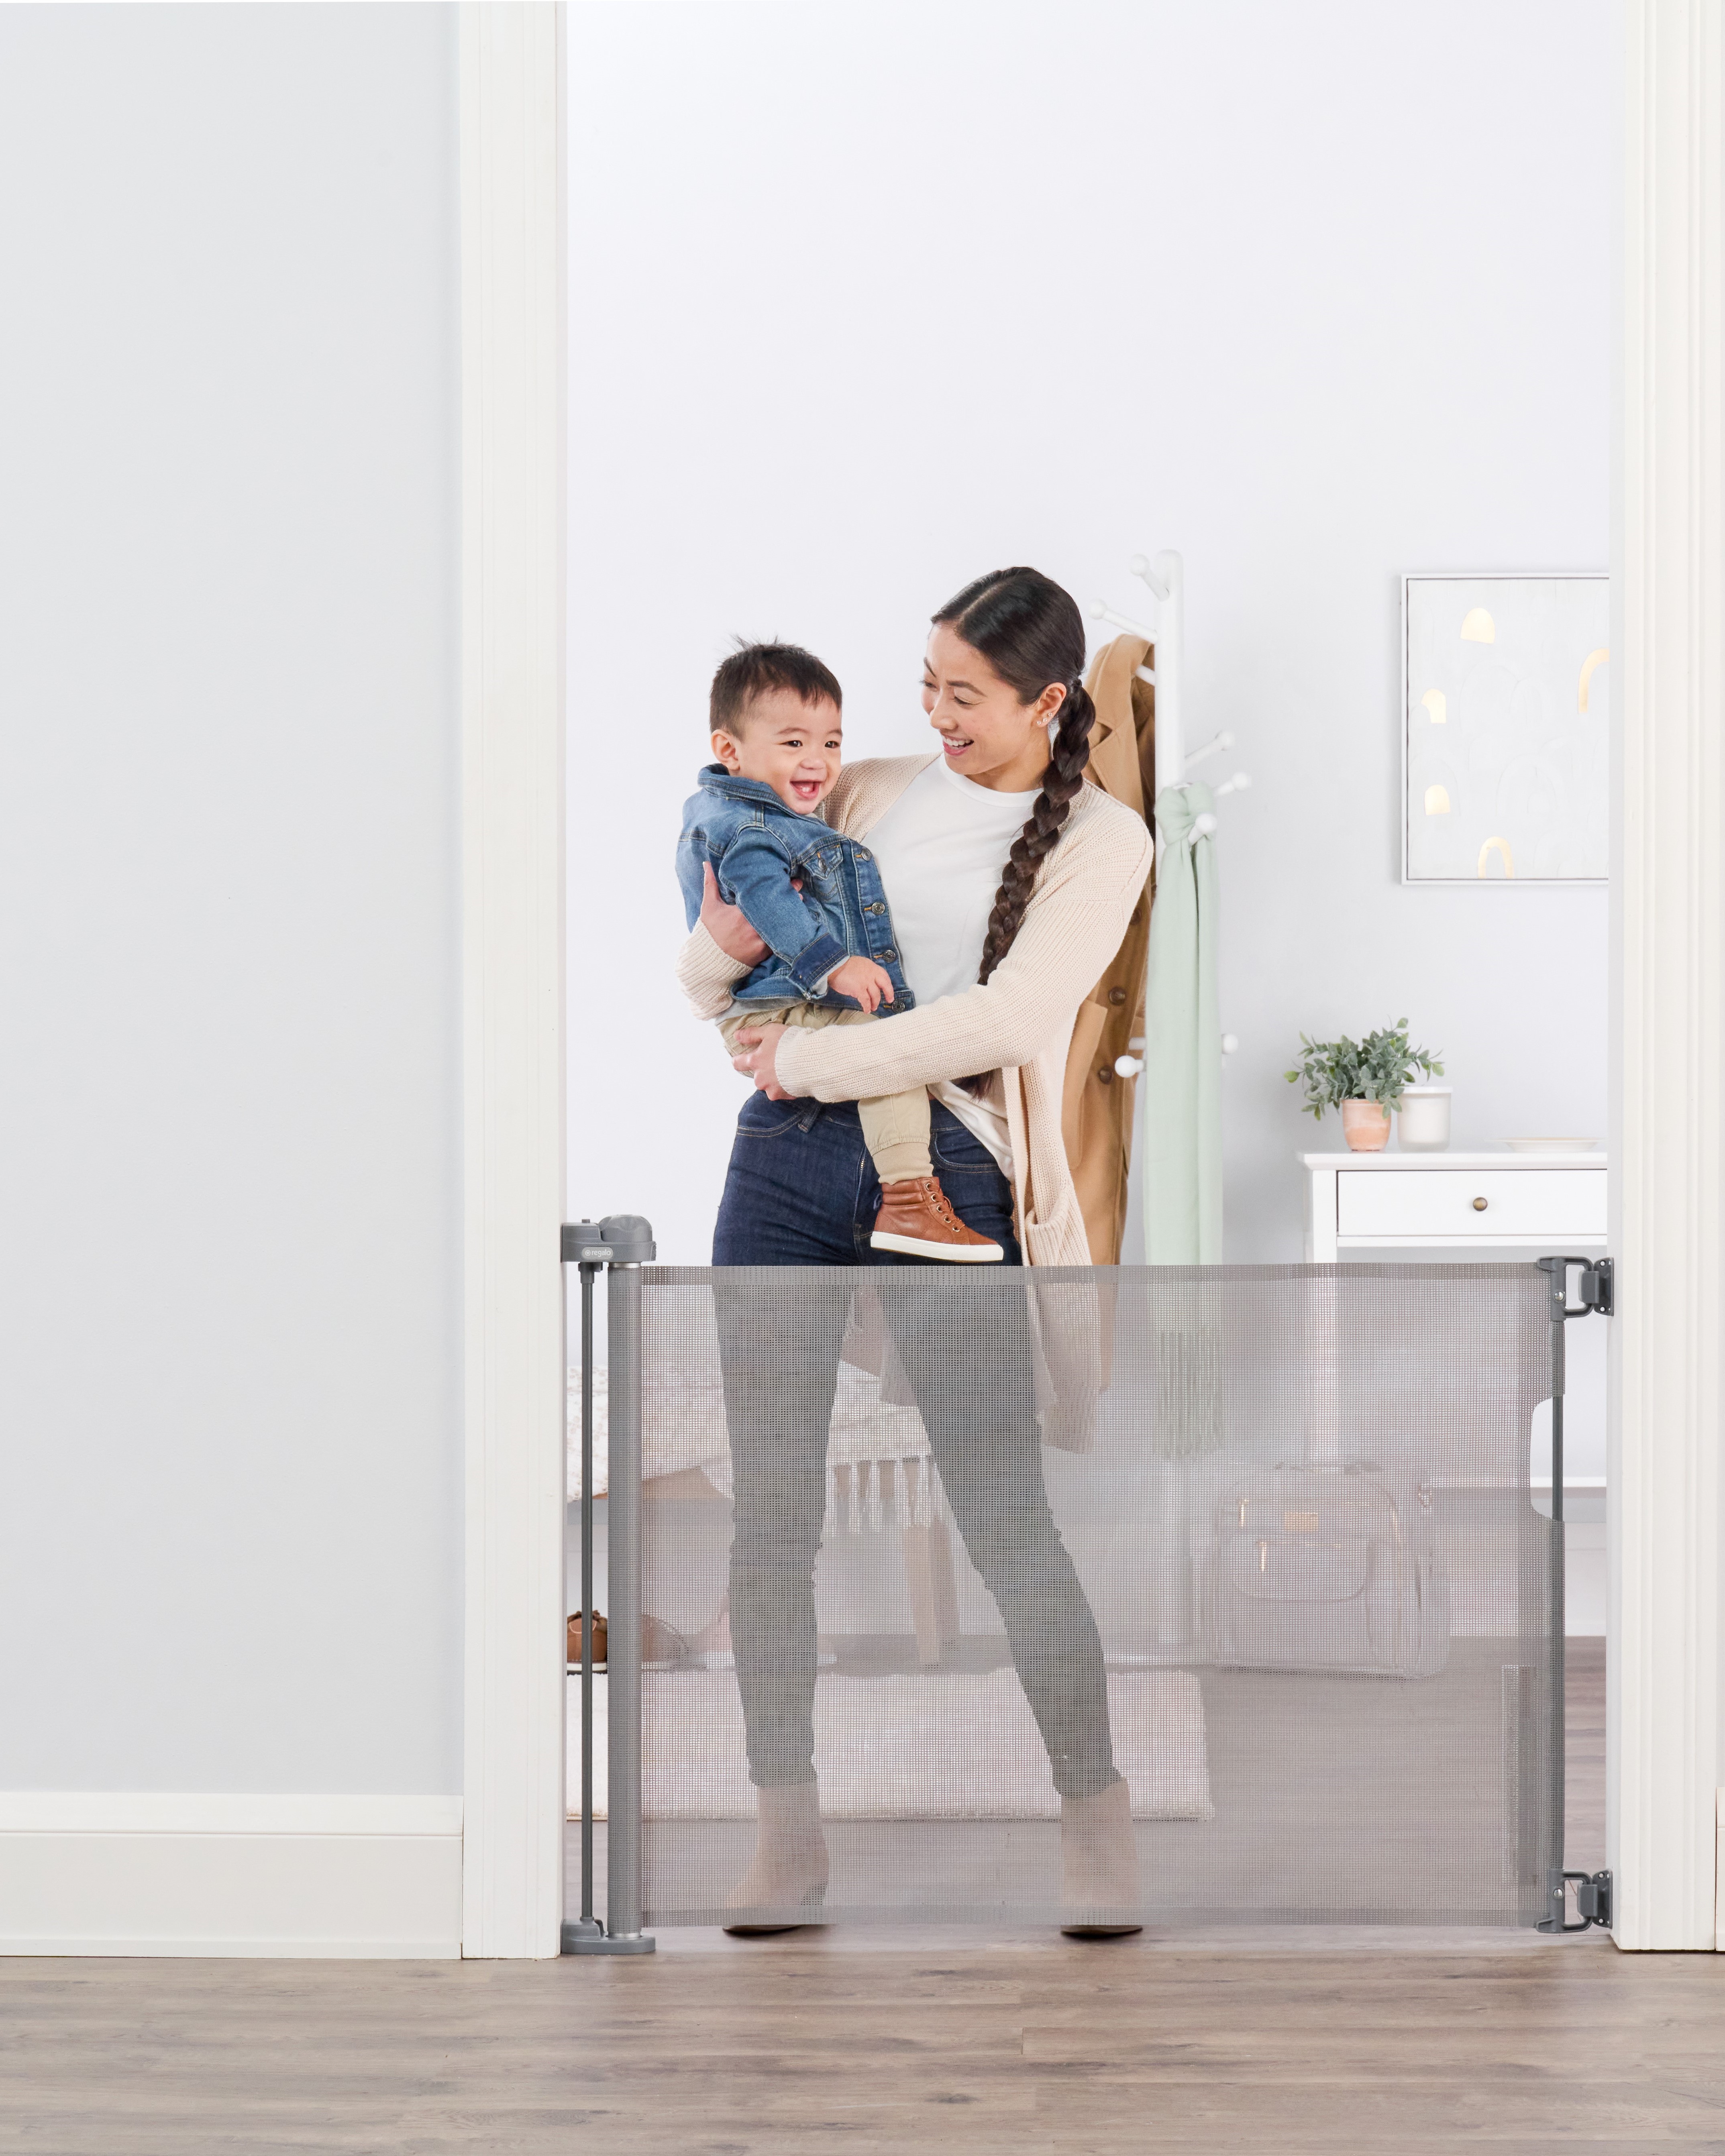 Regalo Retractable Baby Gate, Expands up to 50" Wide, Includes Wall Mounts - image 5 of 5